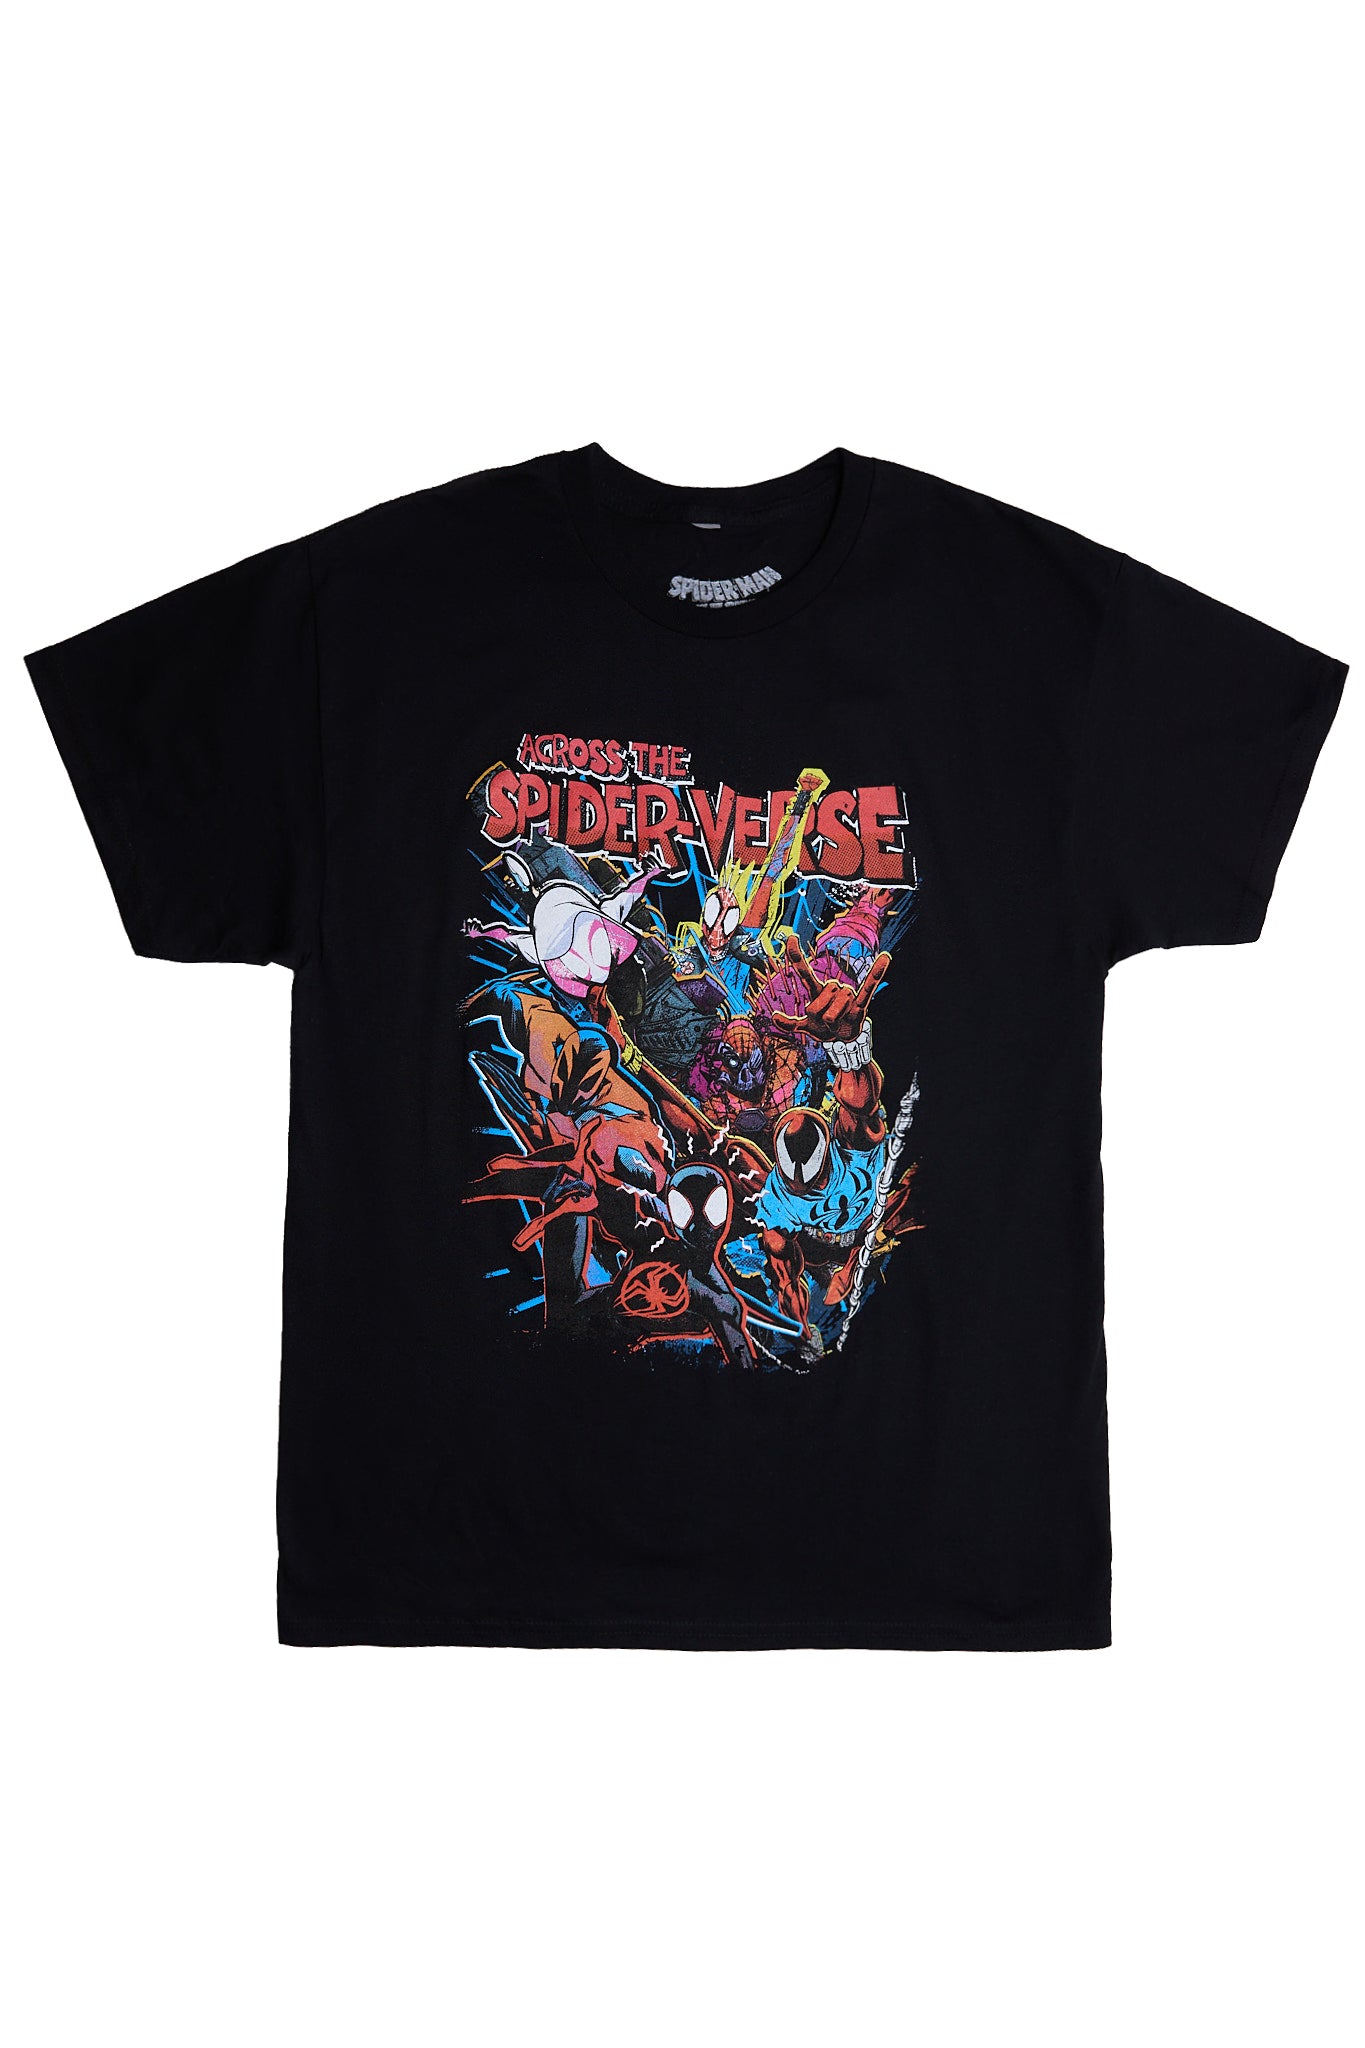 The Spider-Verse Graphic Tee